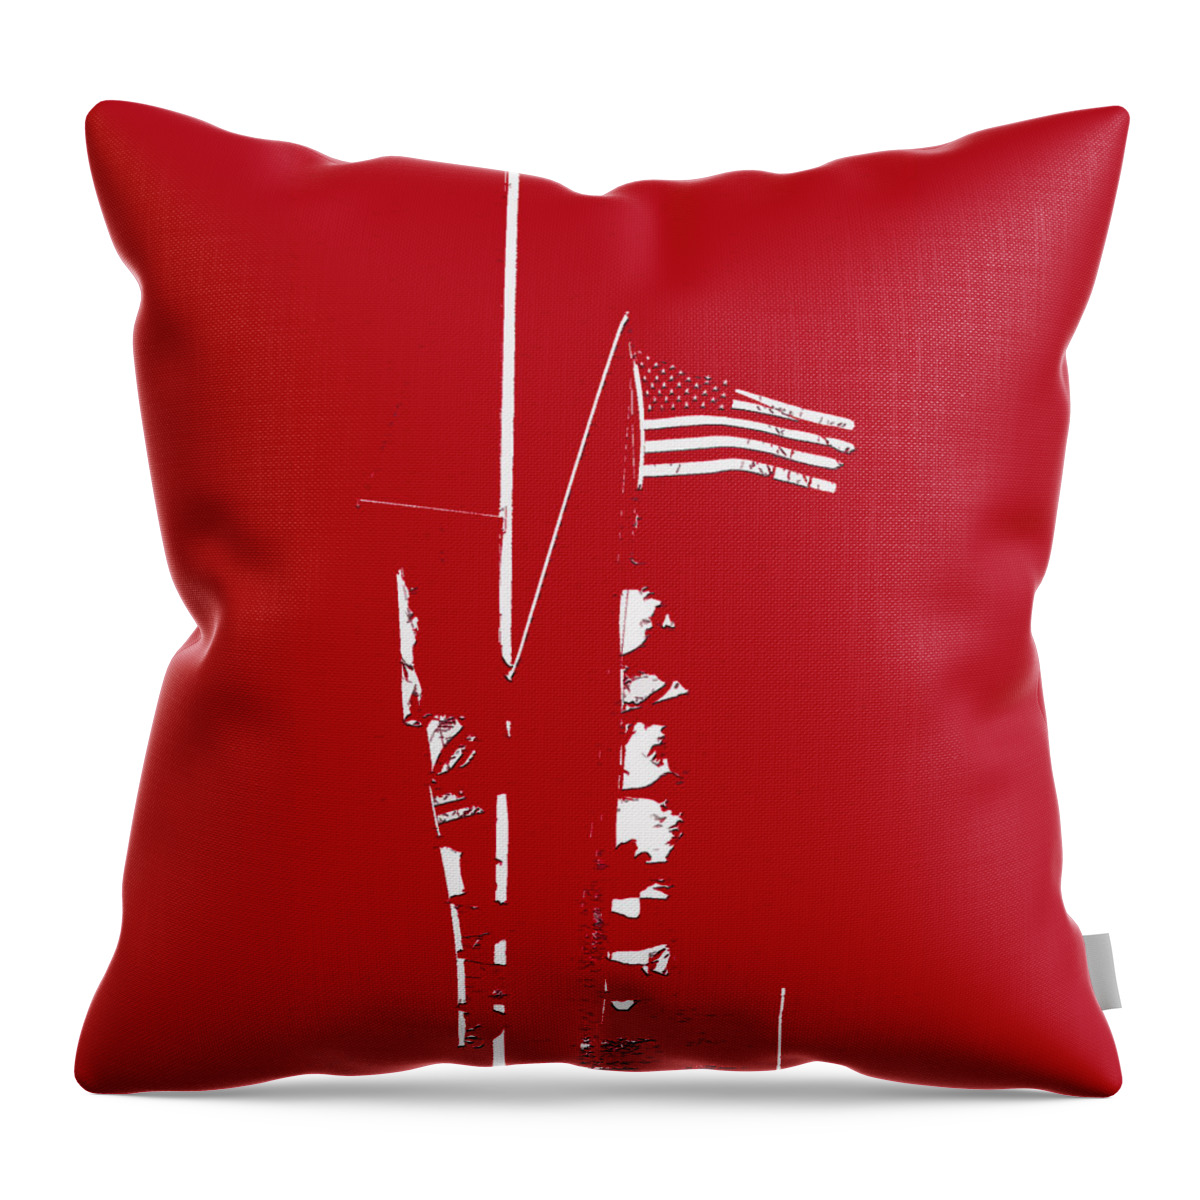 Abstract Photography Throw Pillow featuring the photograph Marina Flags by Bill Owen